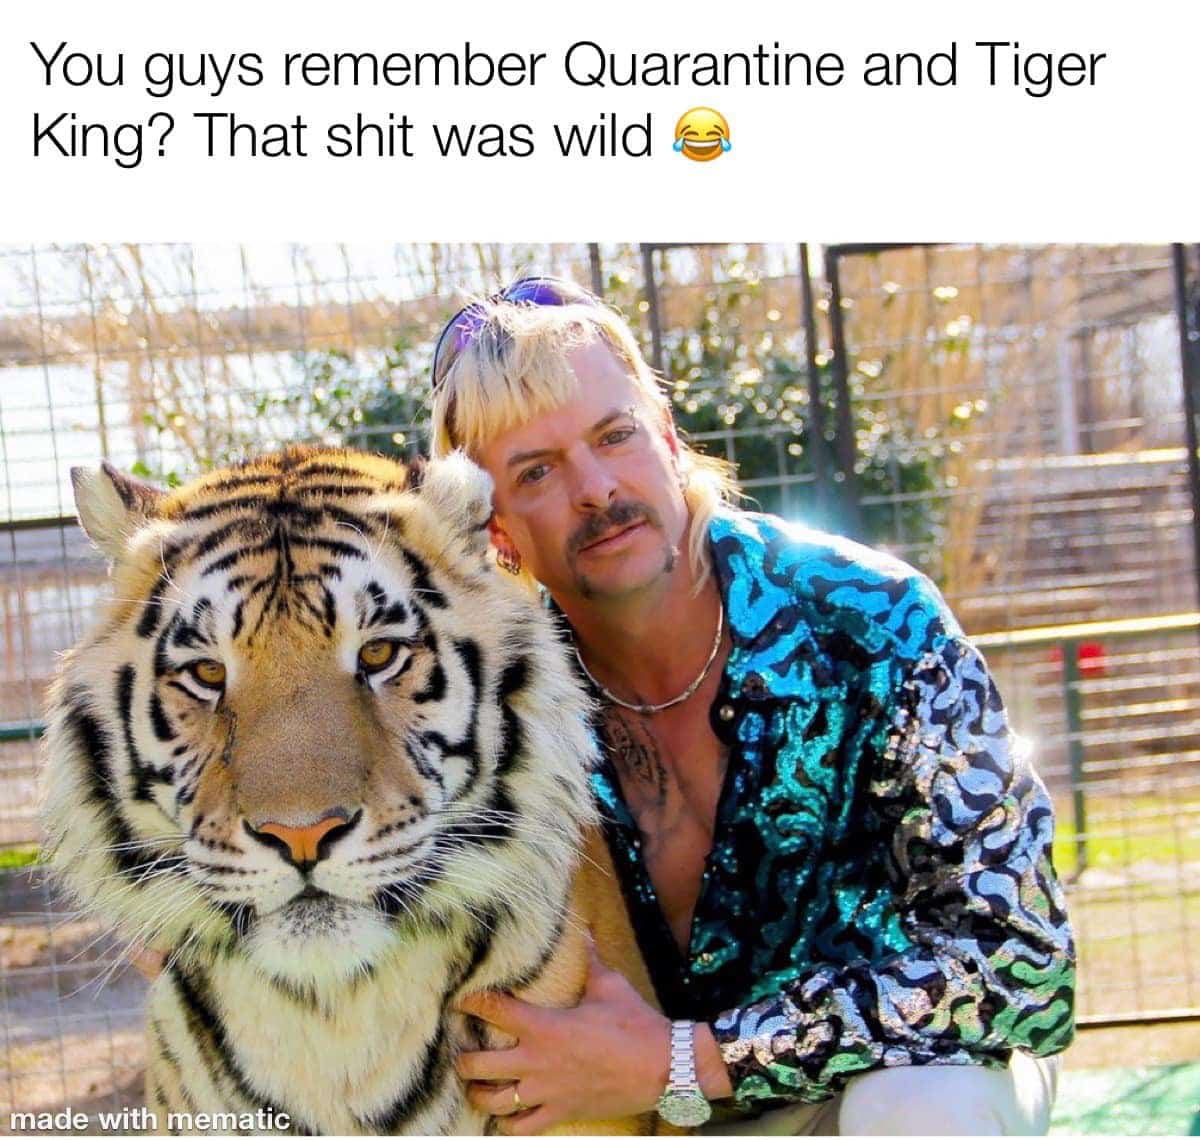 You guys remember Quarantine and Tiger King? That shit was wild! ^_^